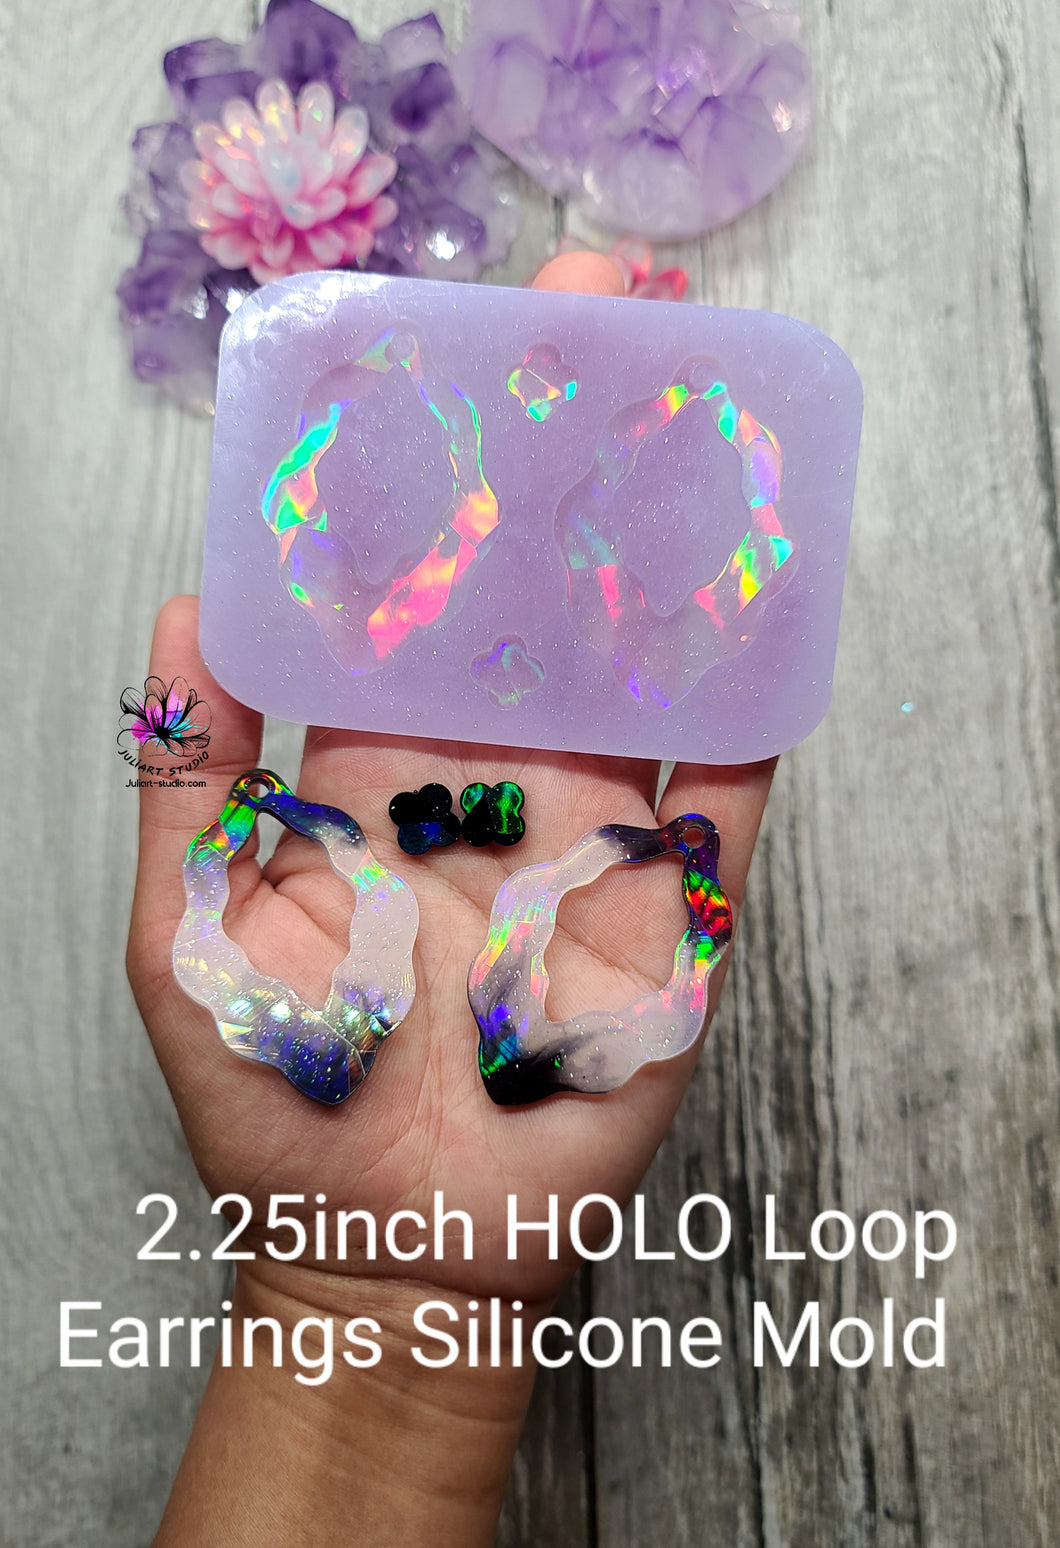 2.25 inch HOLO Loop Earrings Silicone Mold for Resin